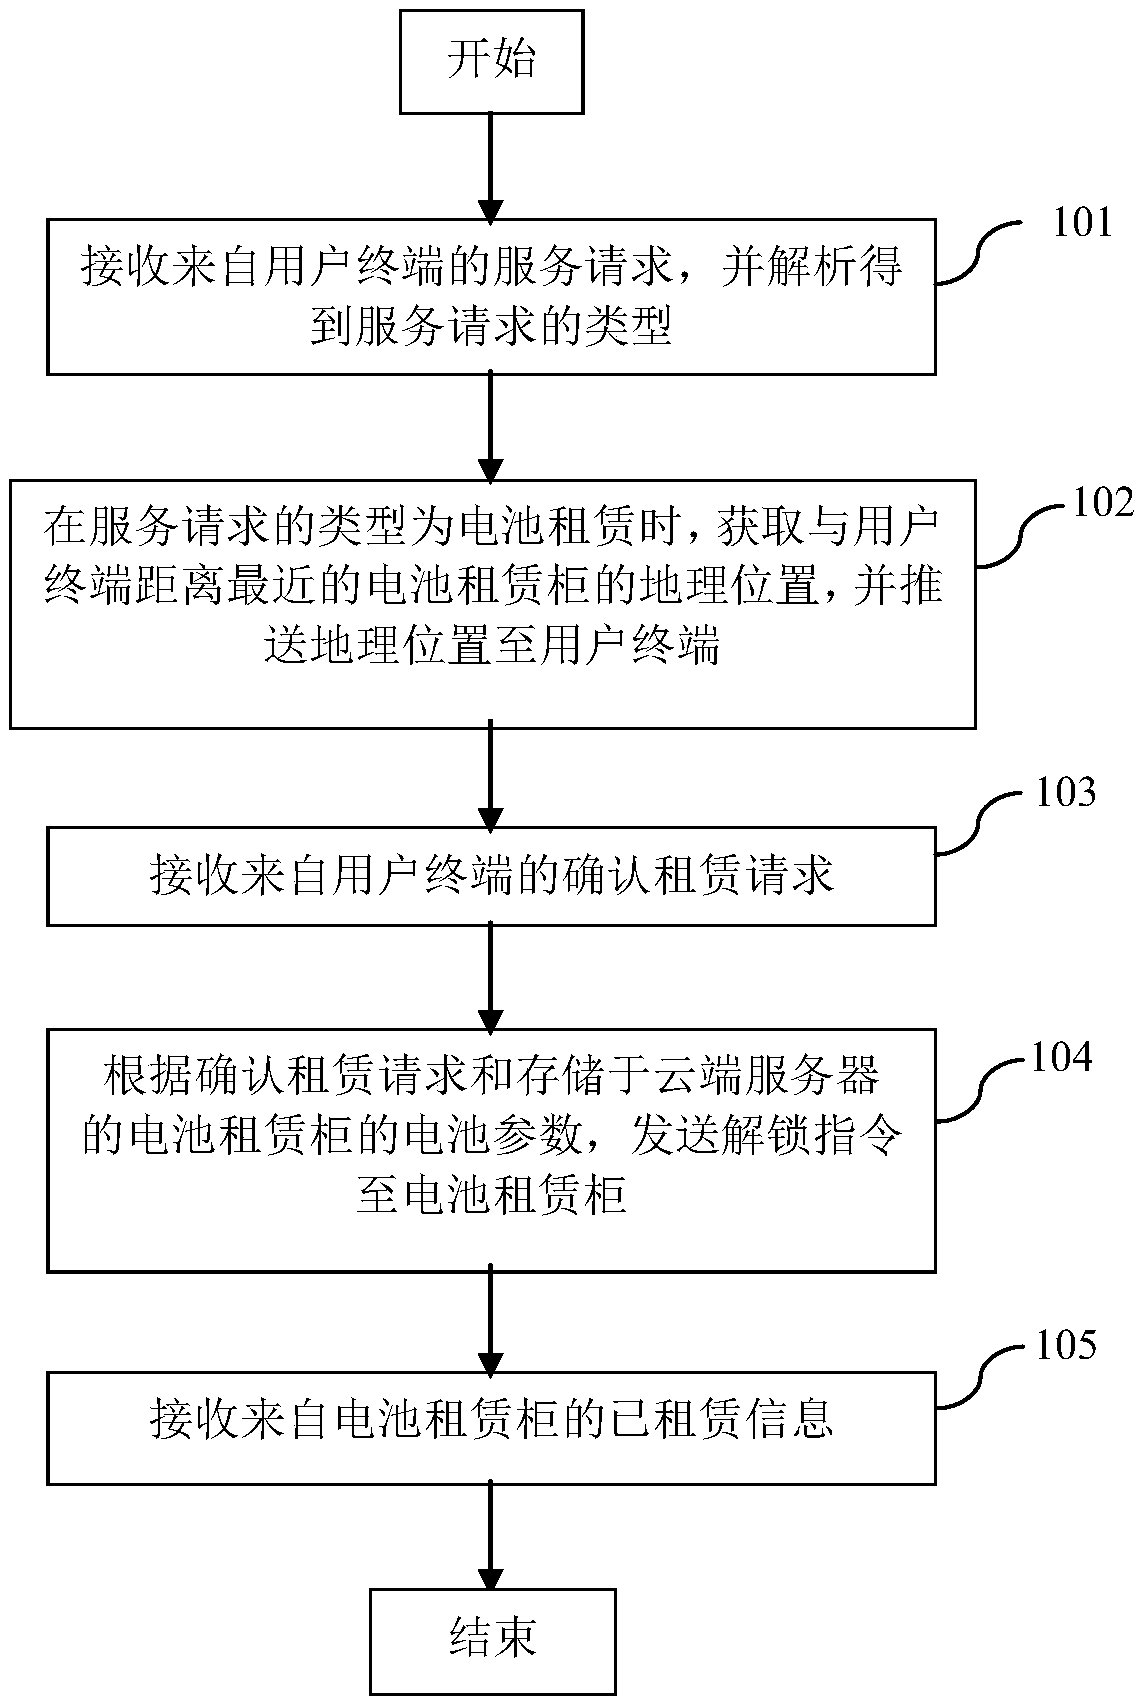 Battery-sharing service method, system and cloud server based on electric vehicle